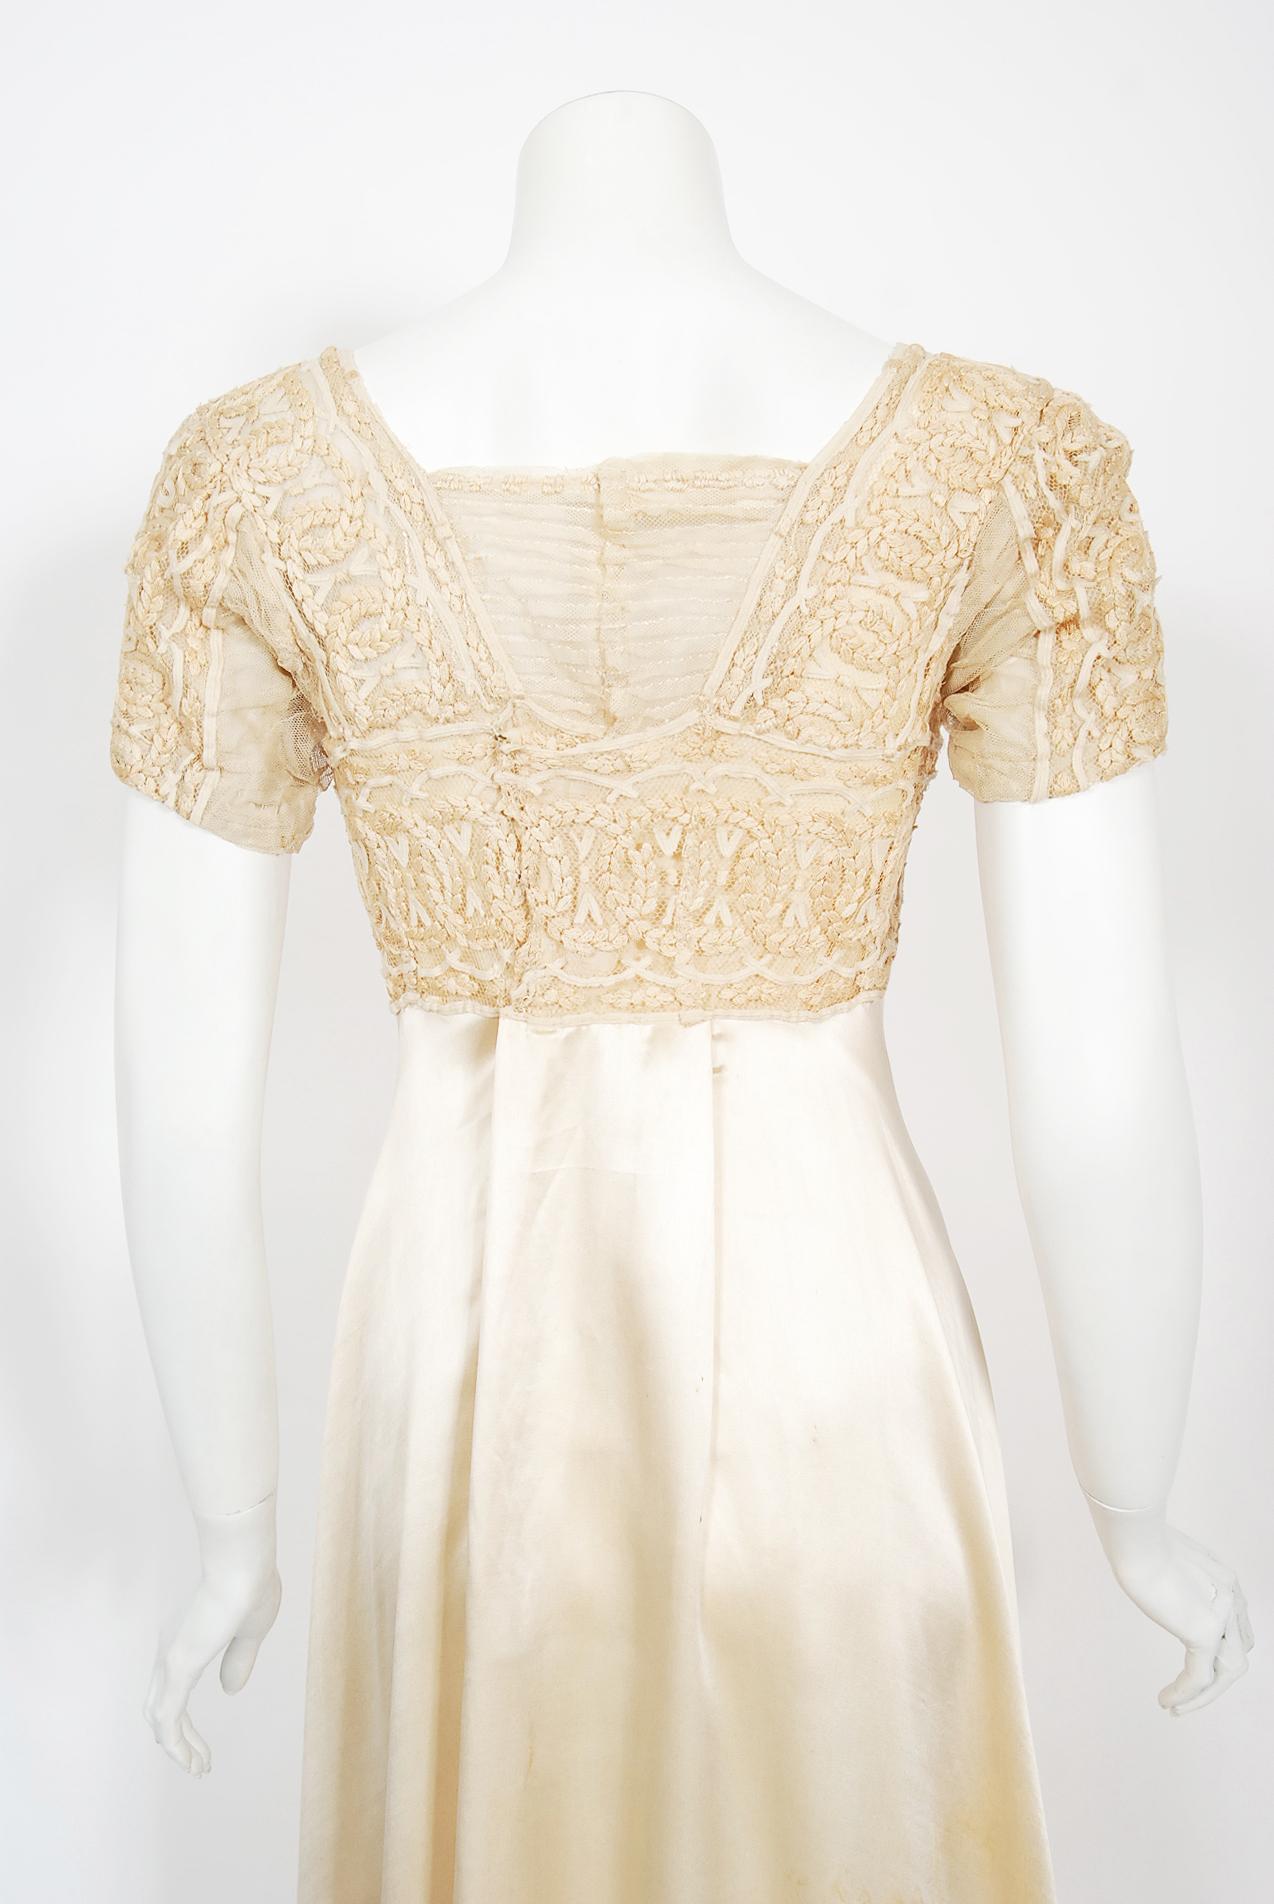 Vintage 1910s Ivory Crème Embroidered Net-Lace & Silk Satin Trained Bridal Gown  For Sale 5